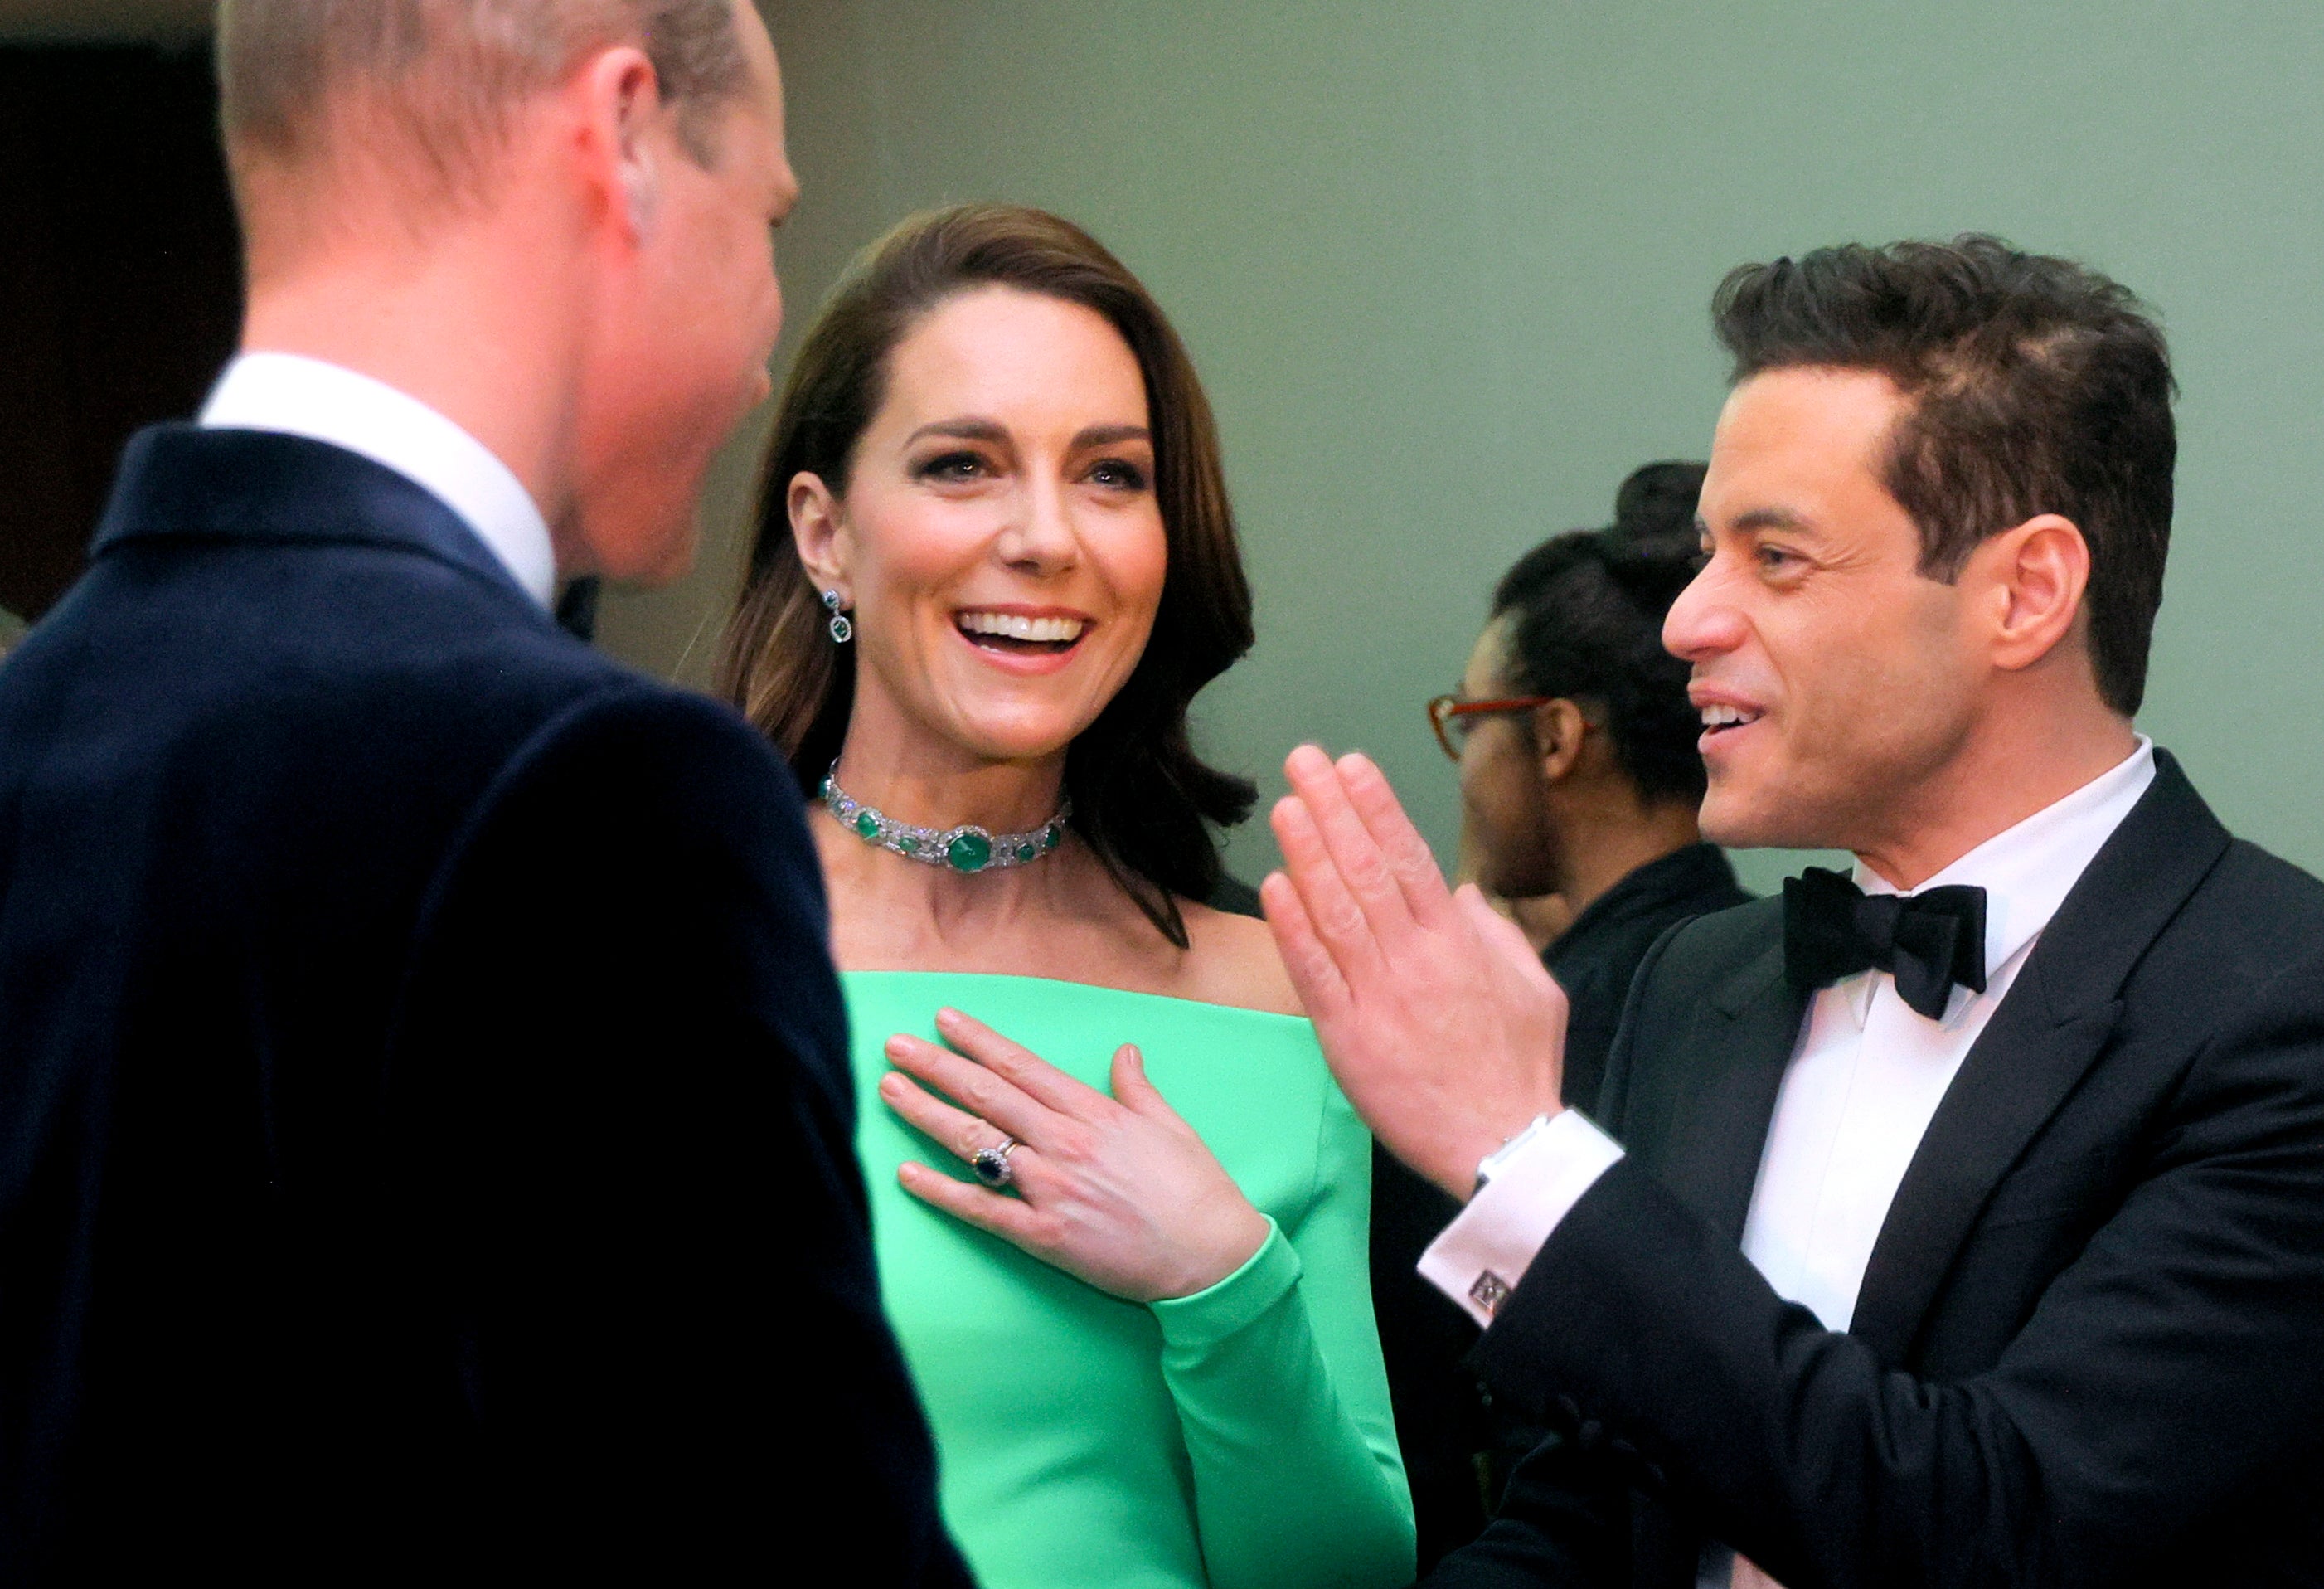 William, Prince of Wales and Catherine, Princess of Wales, talk with actor Rami Malek at the Earthshot Prize Awards ceremony